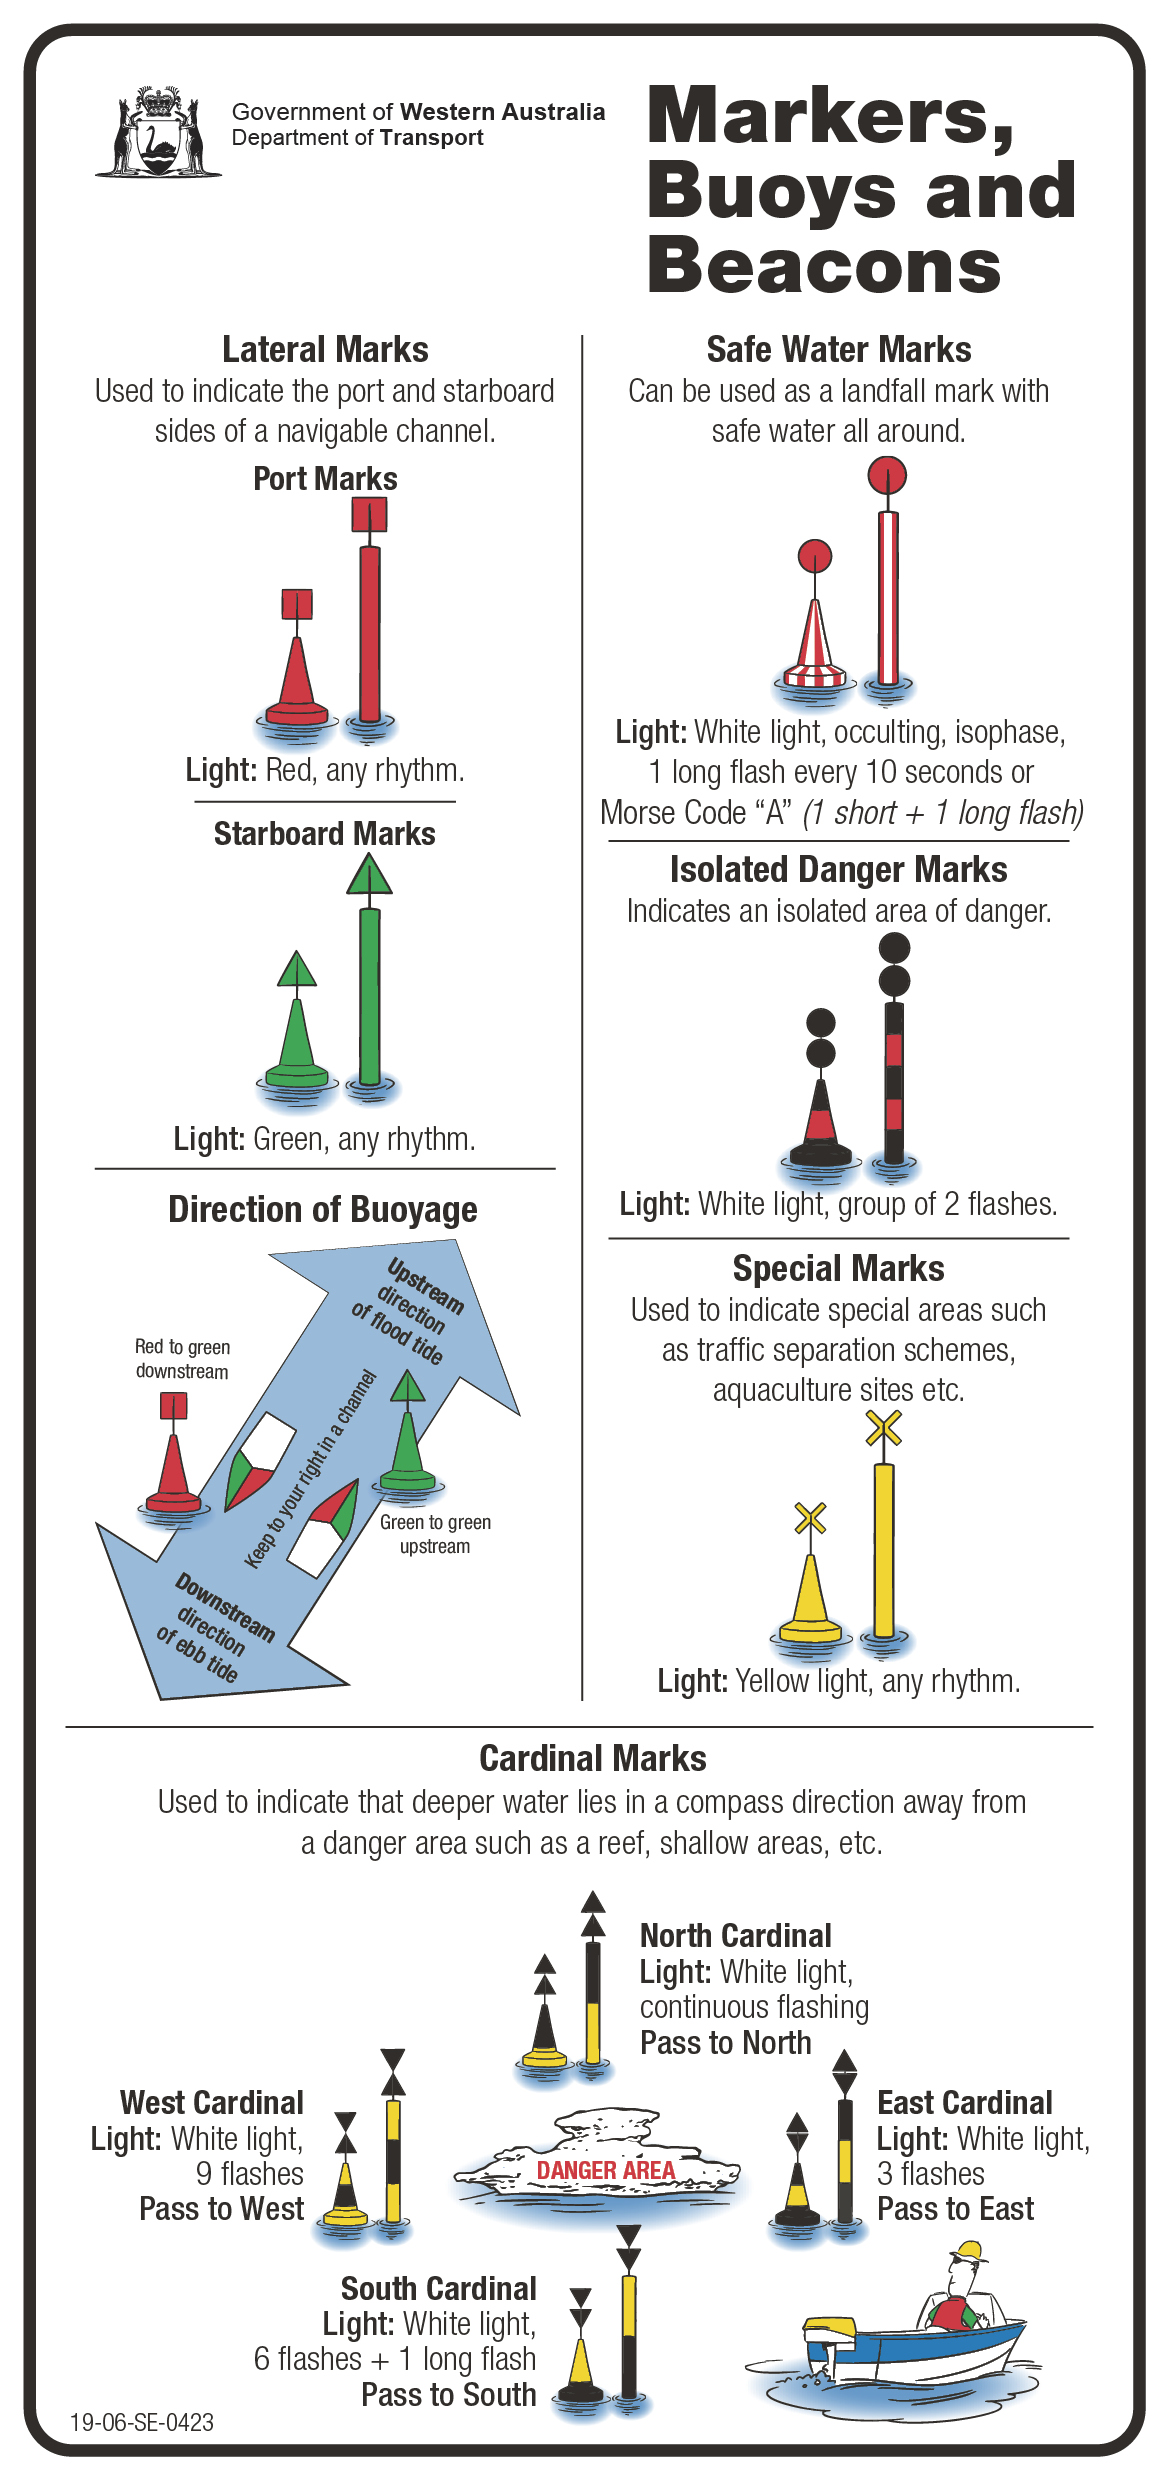 Markers, Buoys and Beacons guide